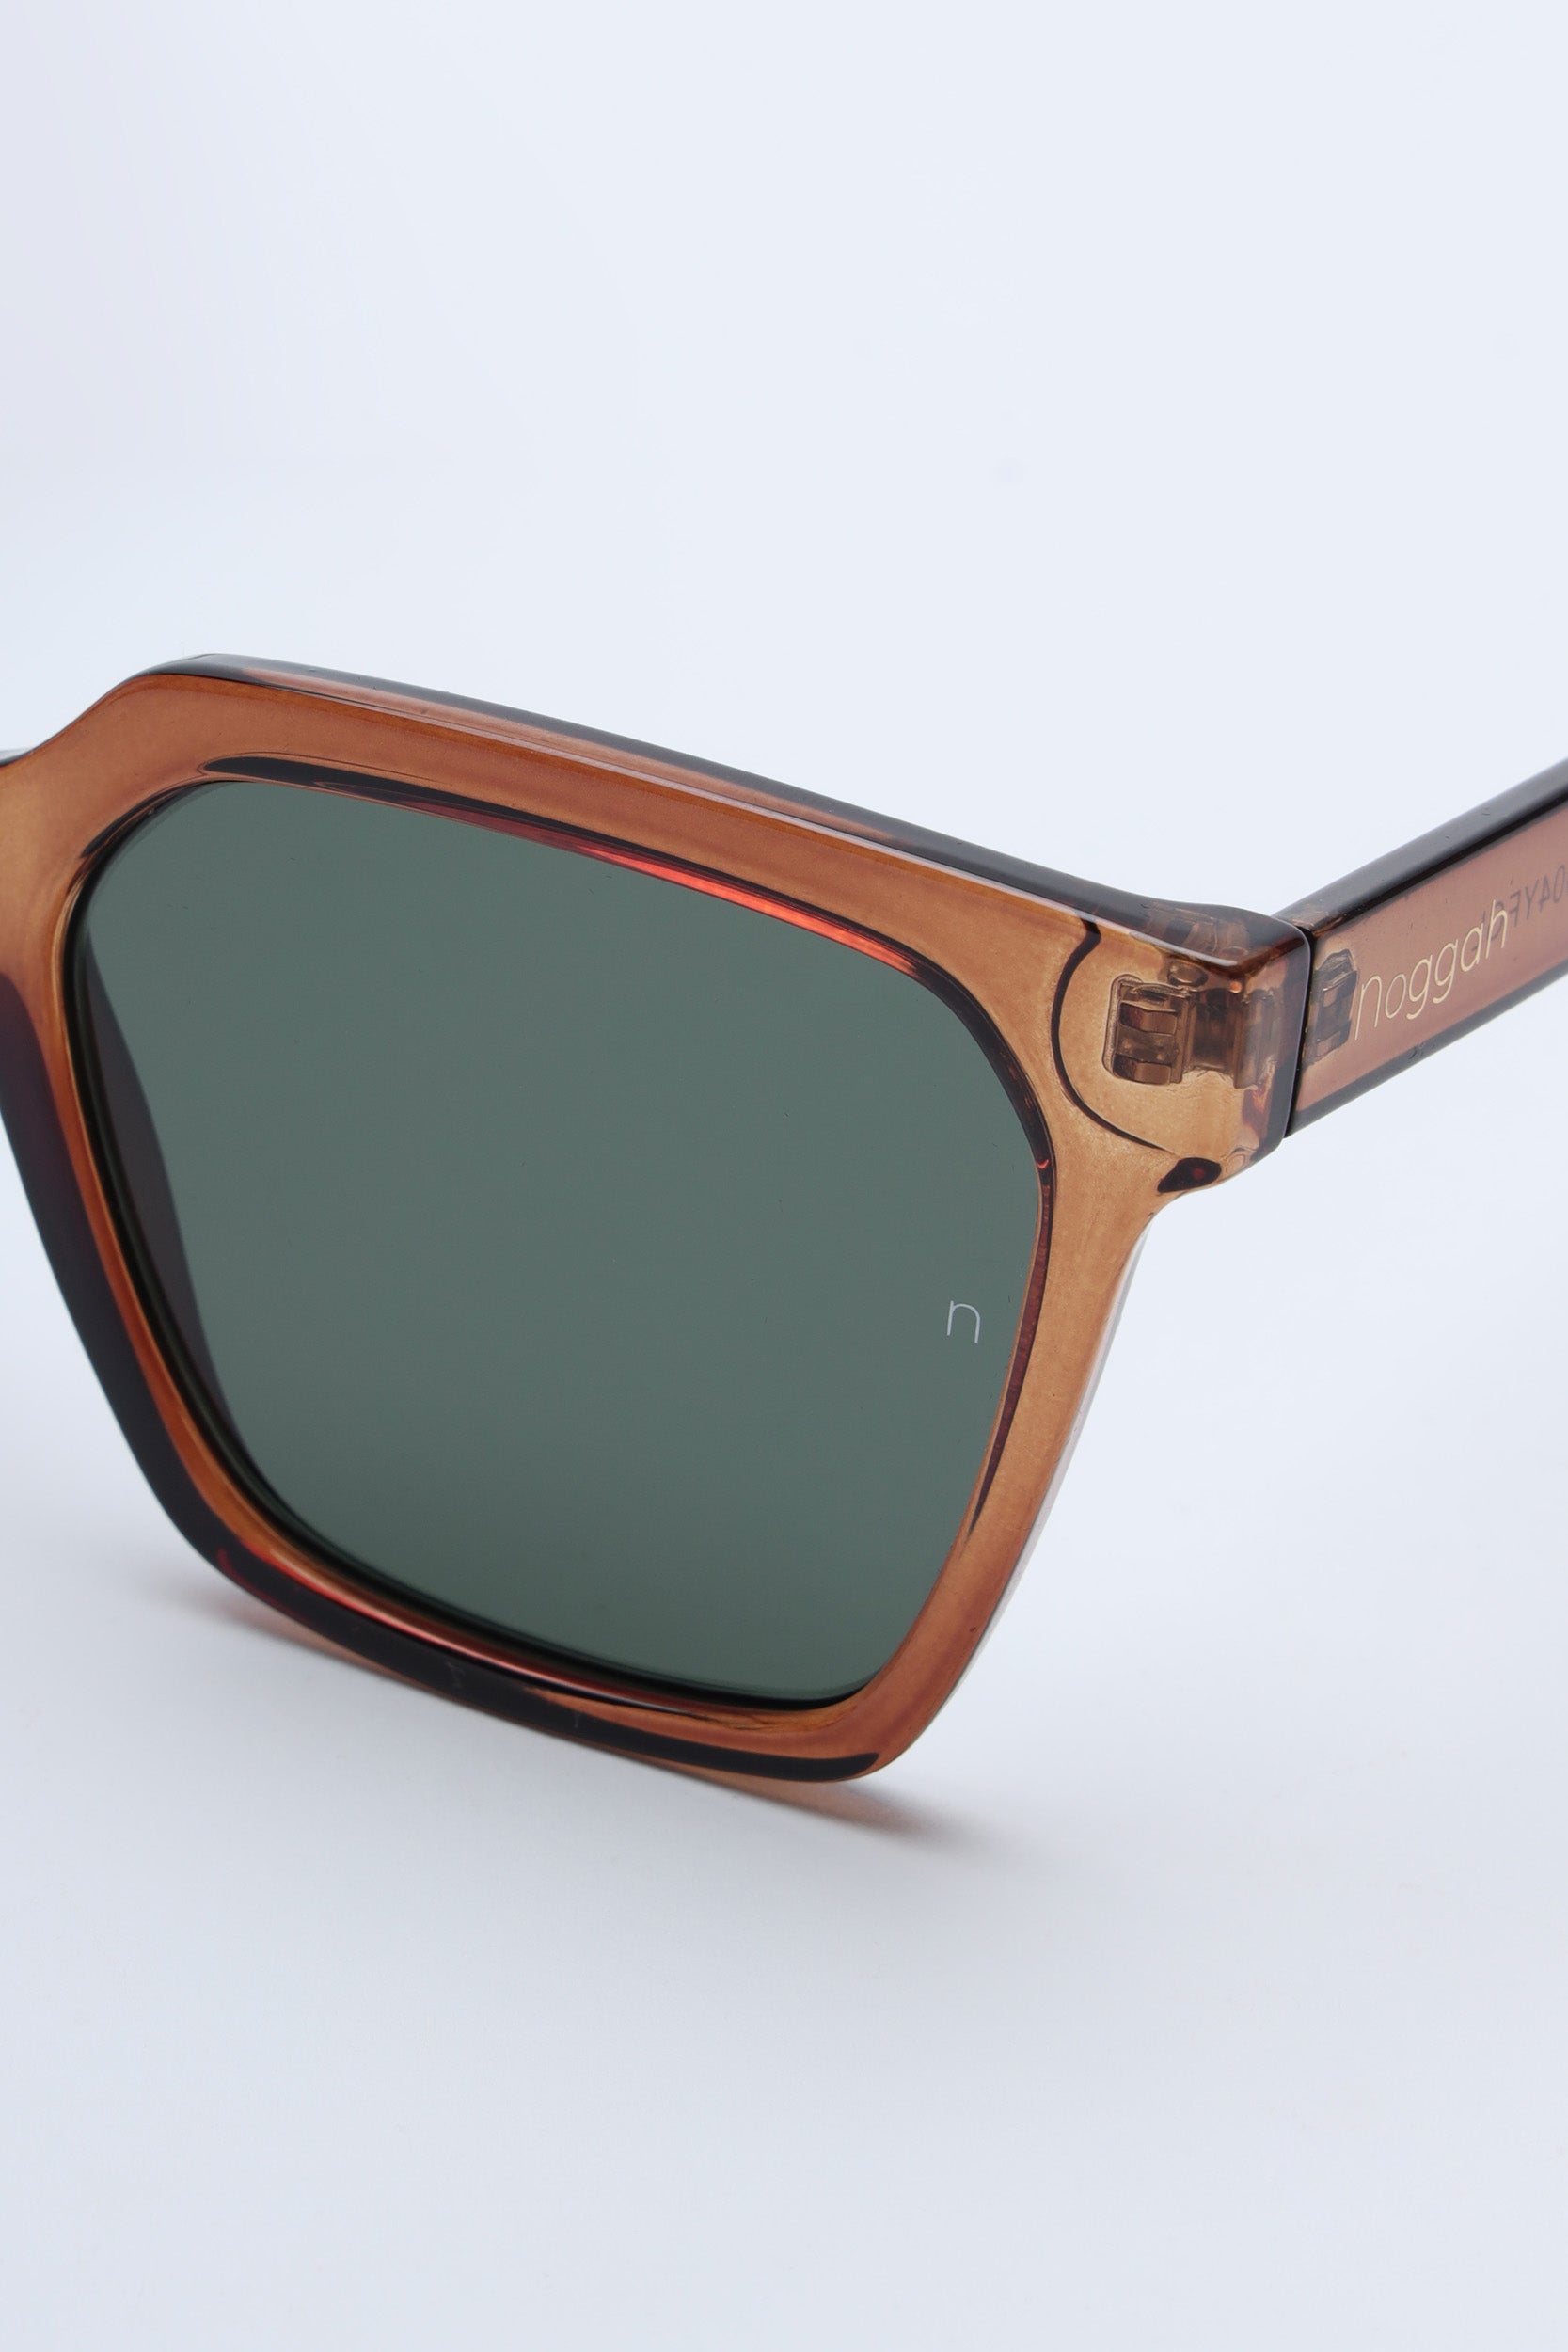 NS1002YFGL PC Brown Frame with Green Glass Lens Sunglasses